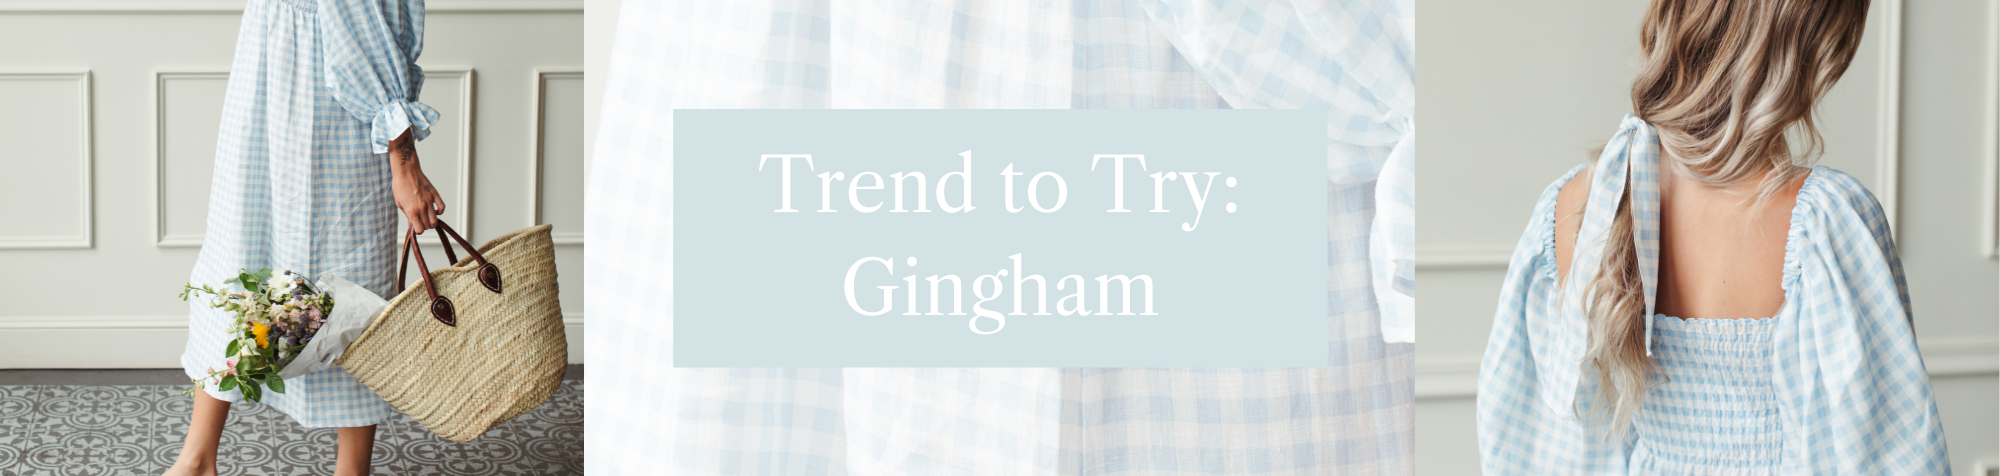 Trend to Try: Gingham